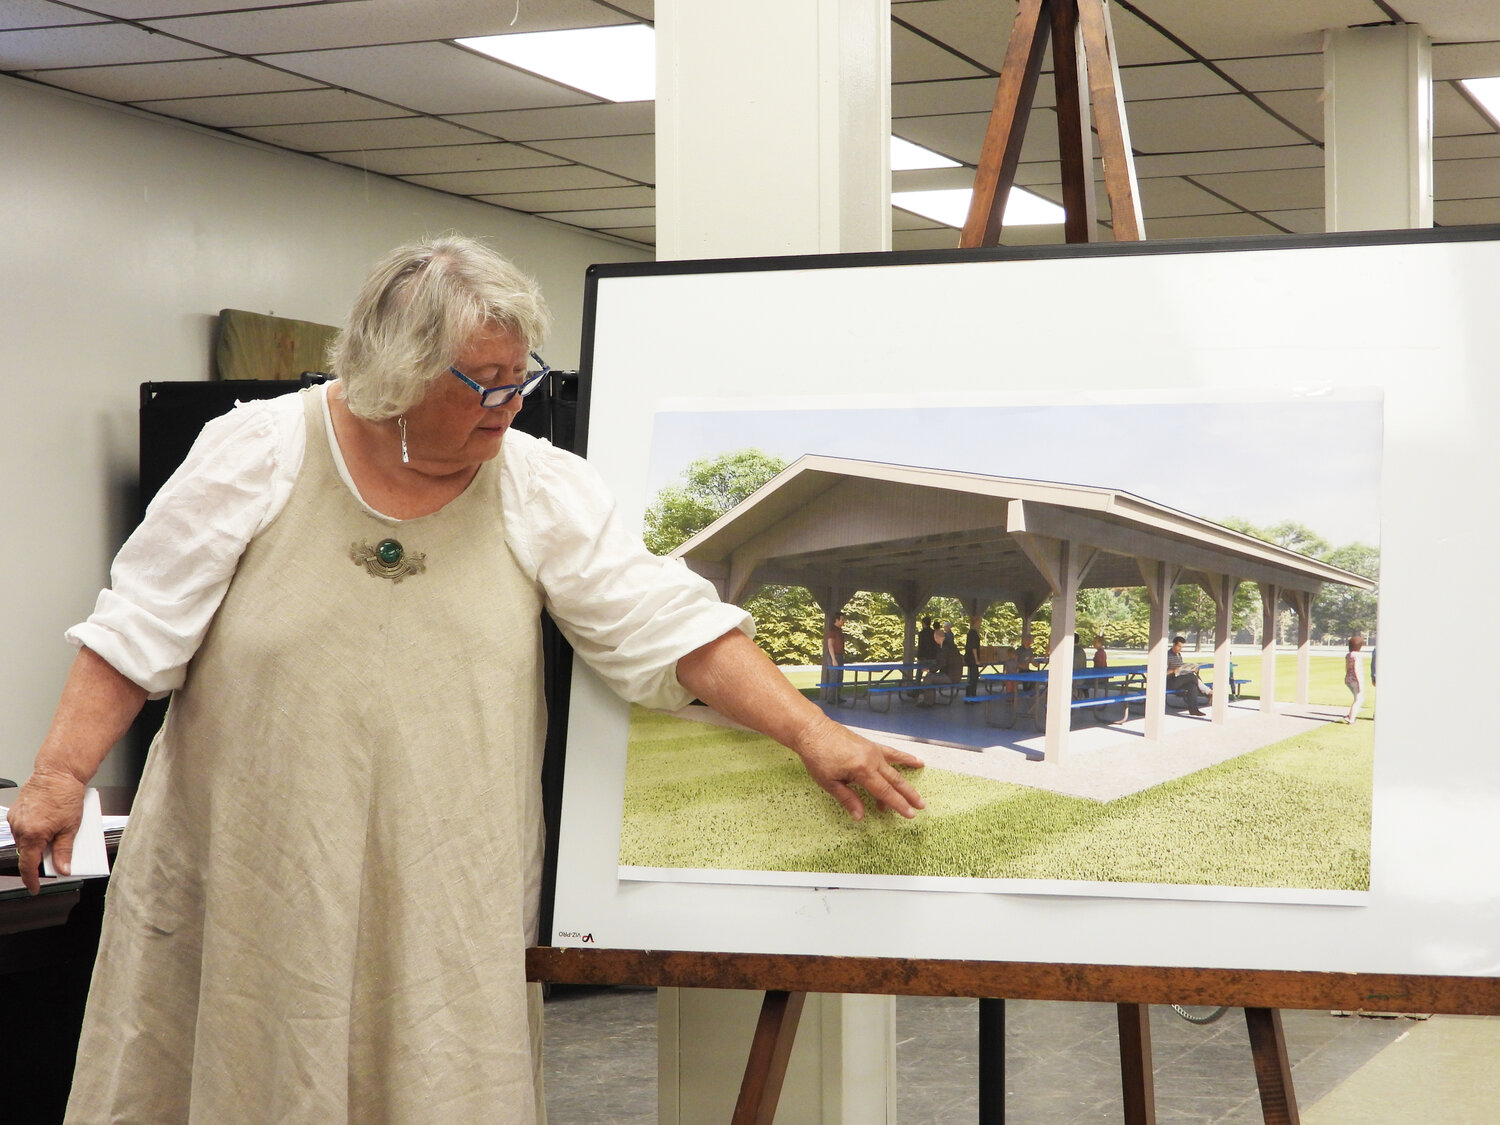 Town of Tusten Deputy Supervisor Jane Luchsinger informed the public on the alterations to the pavilion plan at the recessed Town Board meeting on August 25, with new renditions of the updated design of the structure